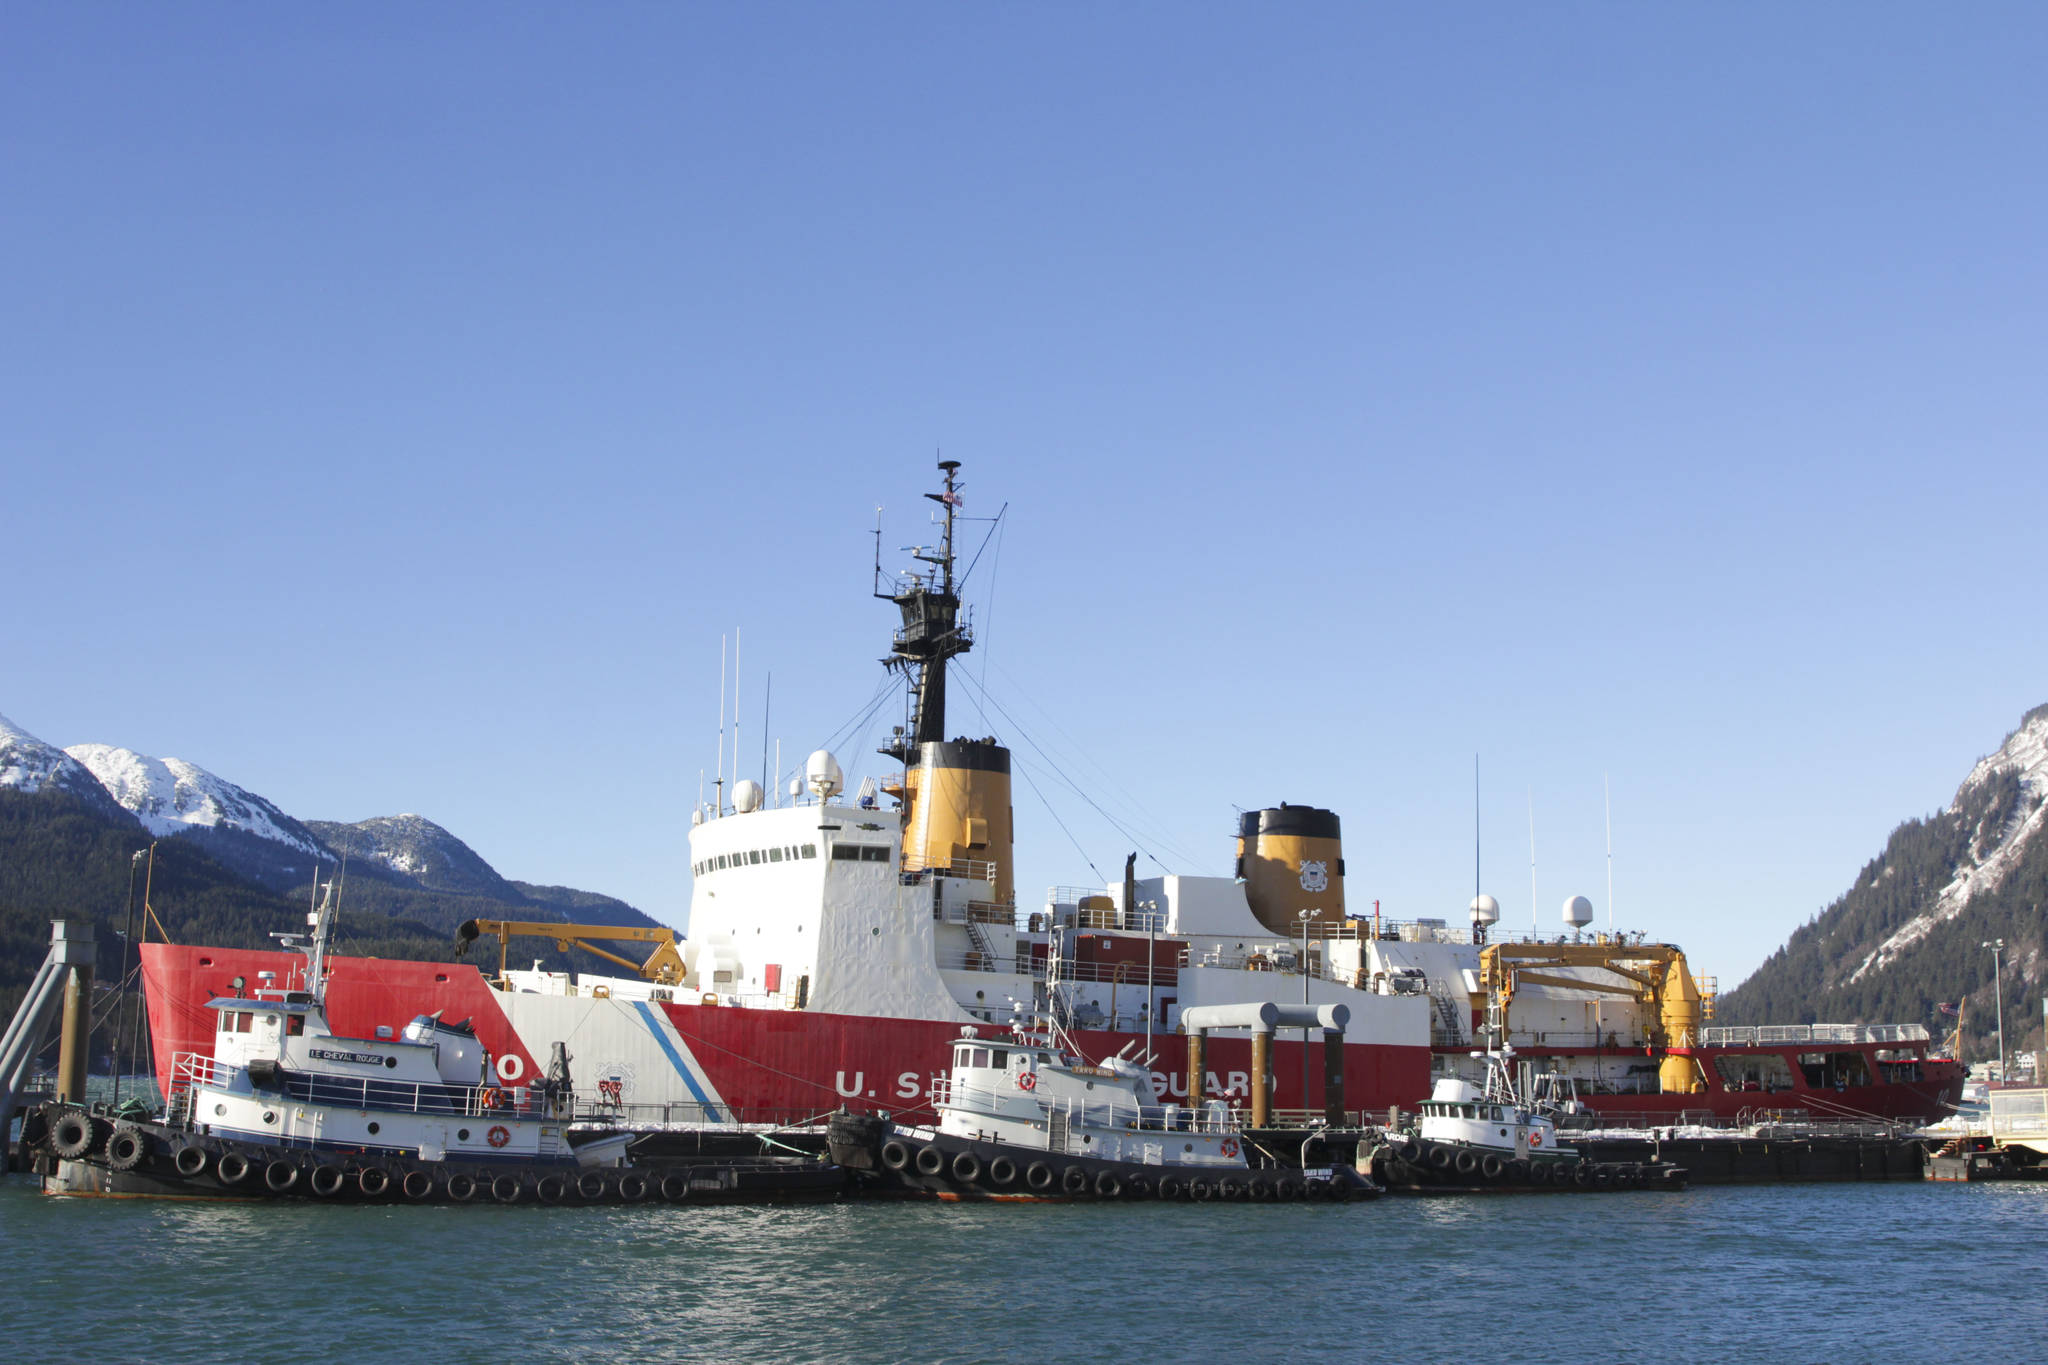 The U.S. Coast Guard Cutter Polar Star arrived in Juneau Friday, Feb. 12, 2021, to resupply from extended operations in the Arctic over the winter. (Michael S. Lockett / Juneau Empire)